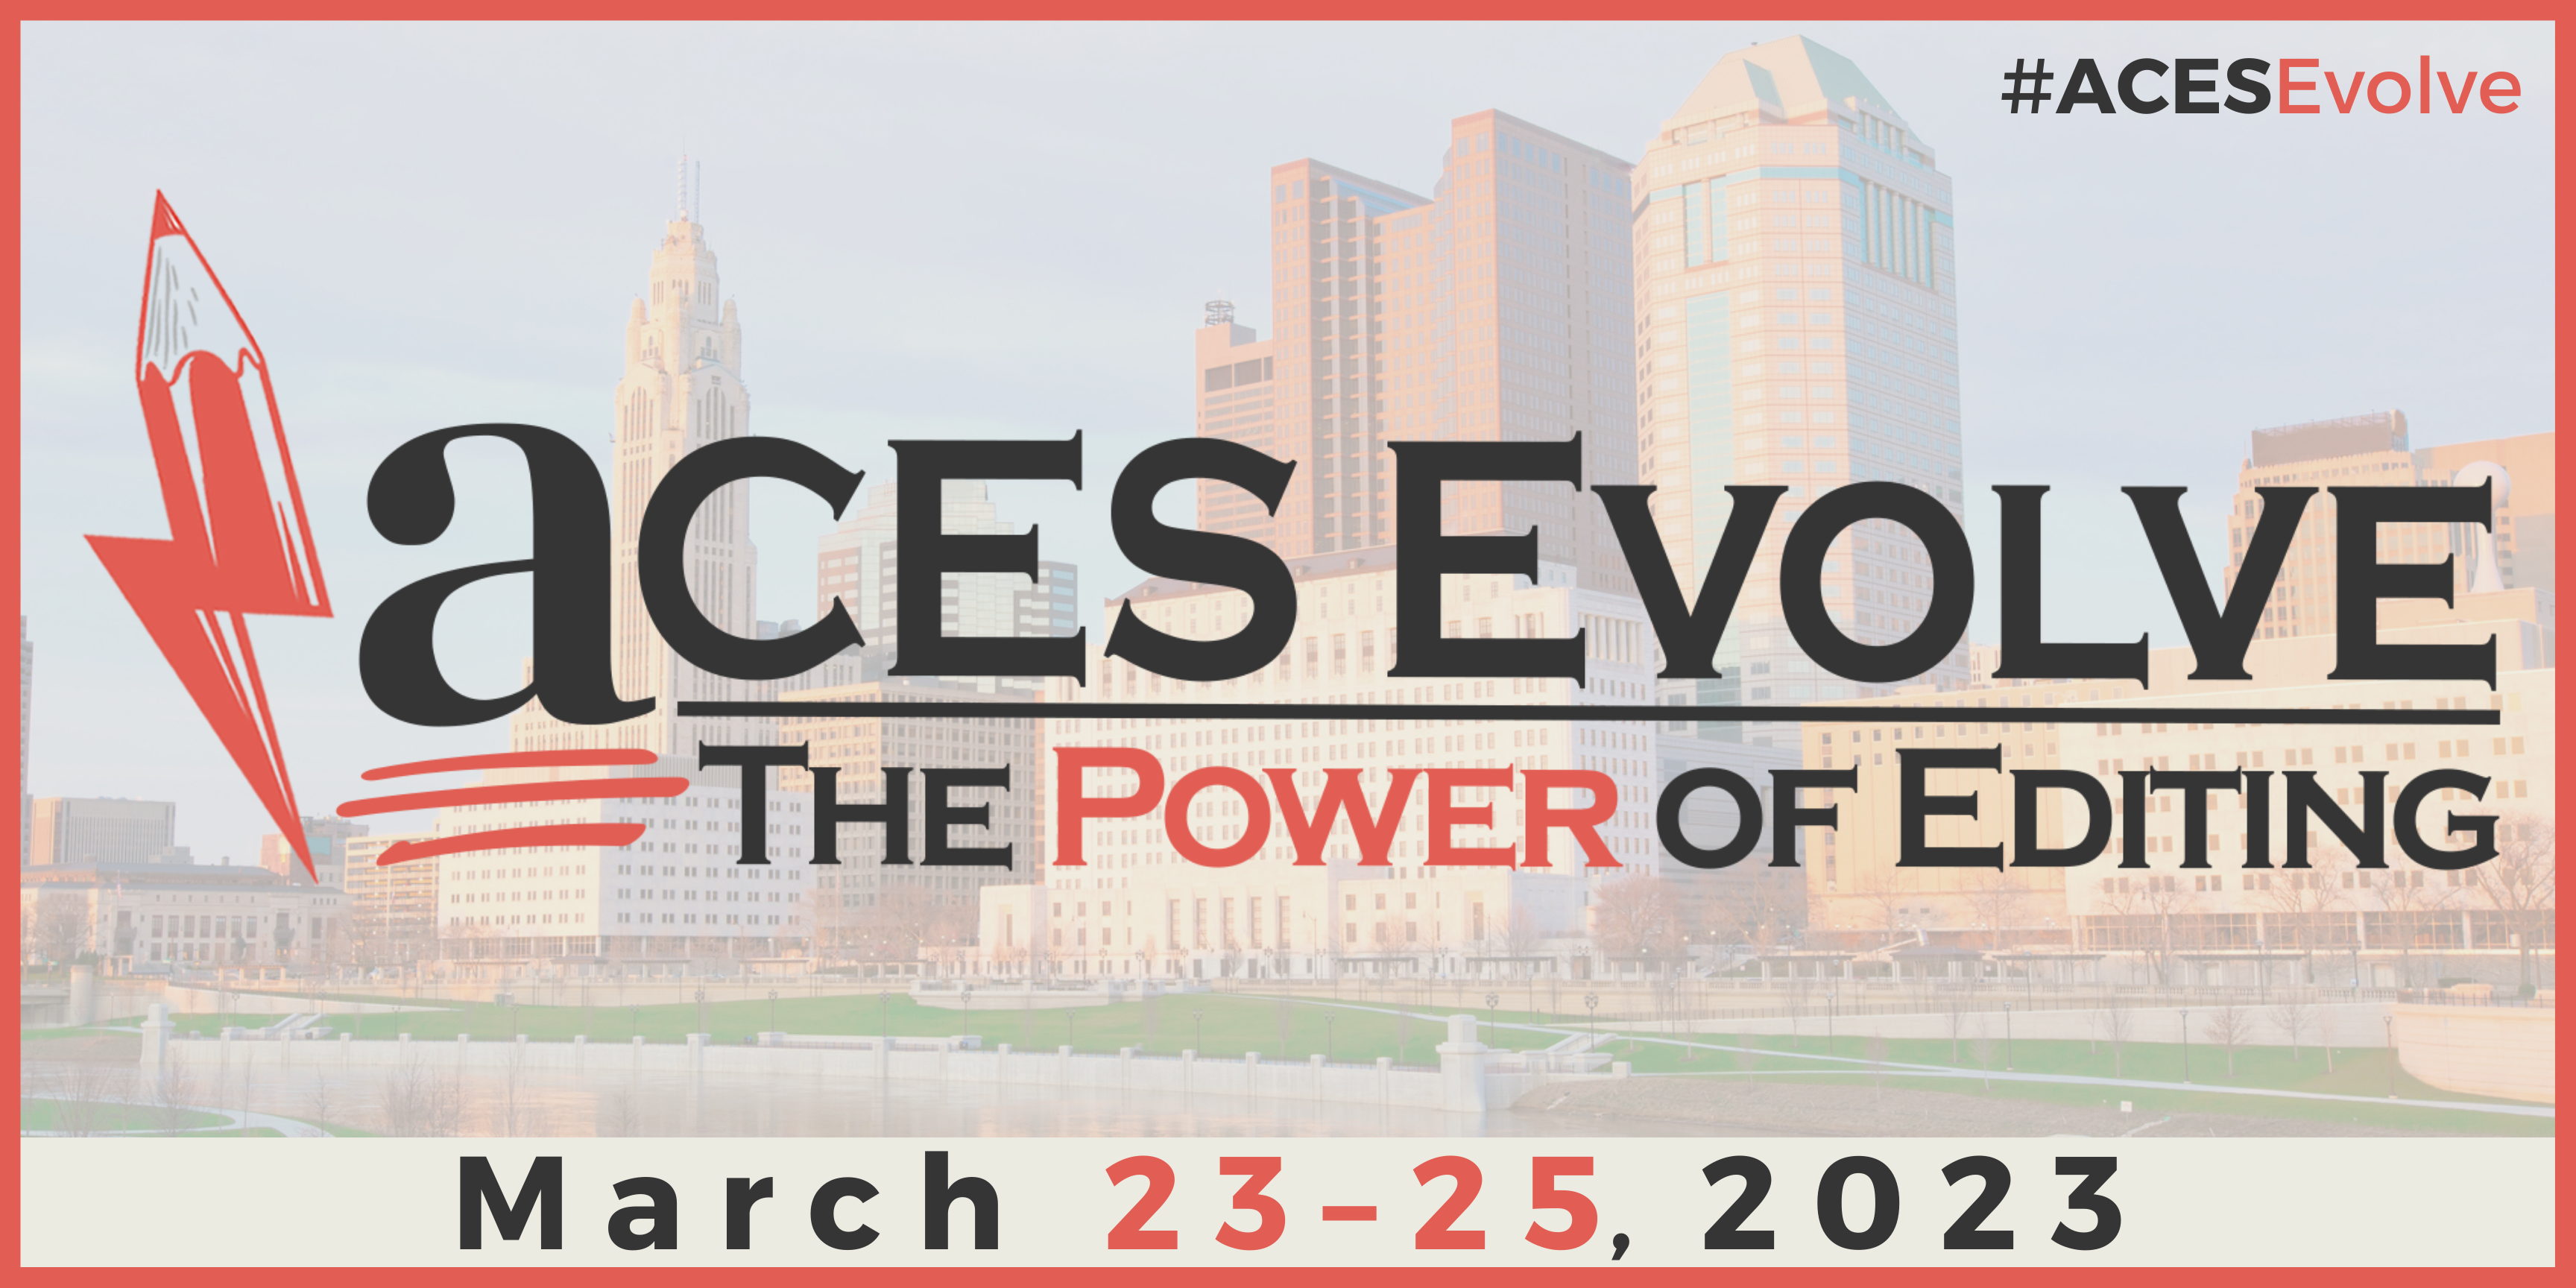 ACES Evolve, The Power of Editing | Columbus, OH | March 23-25, 2023